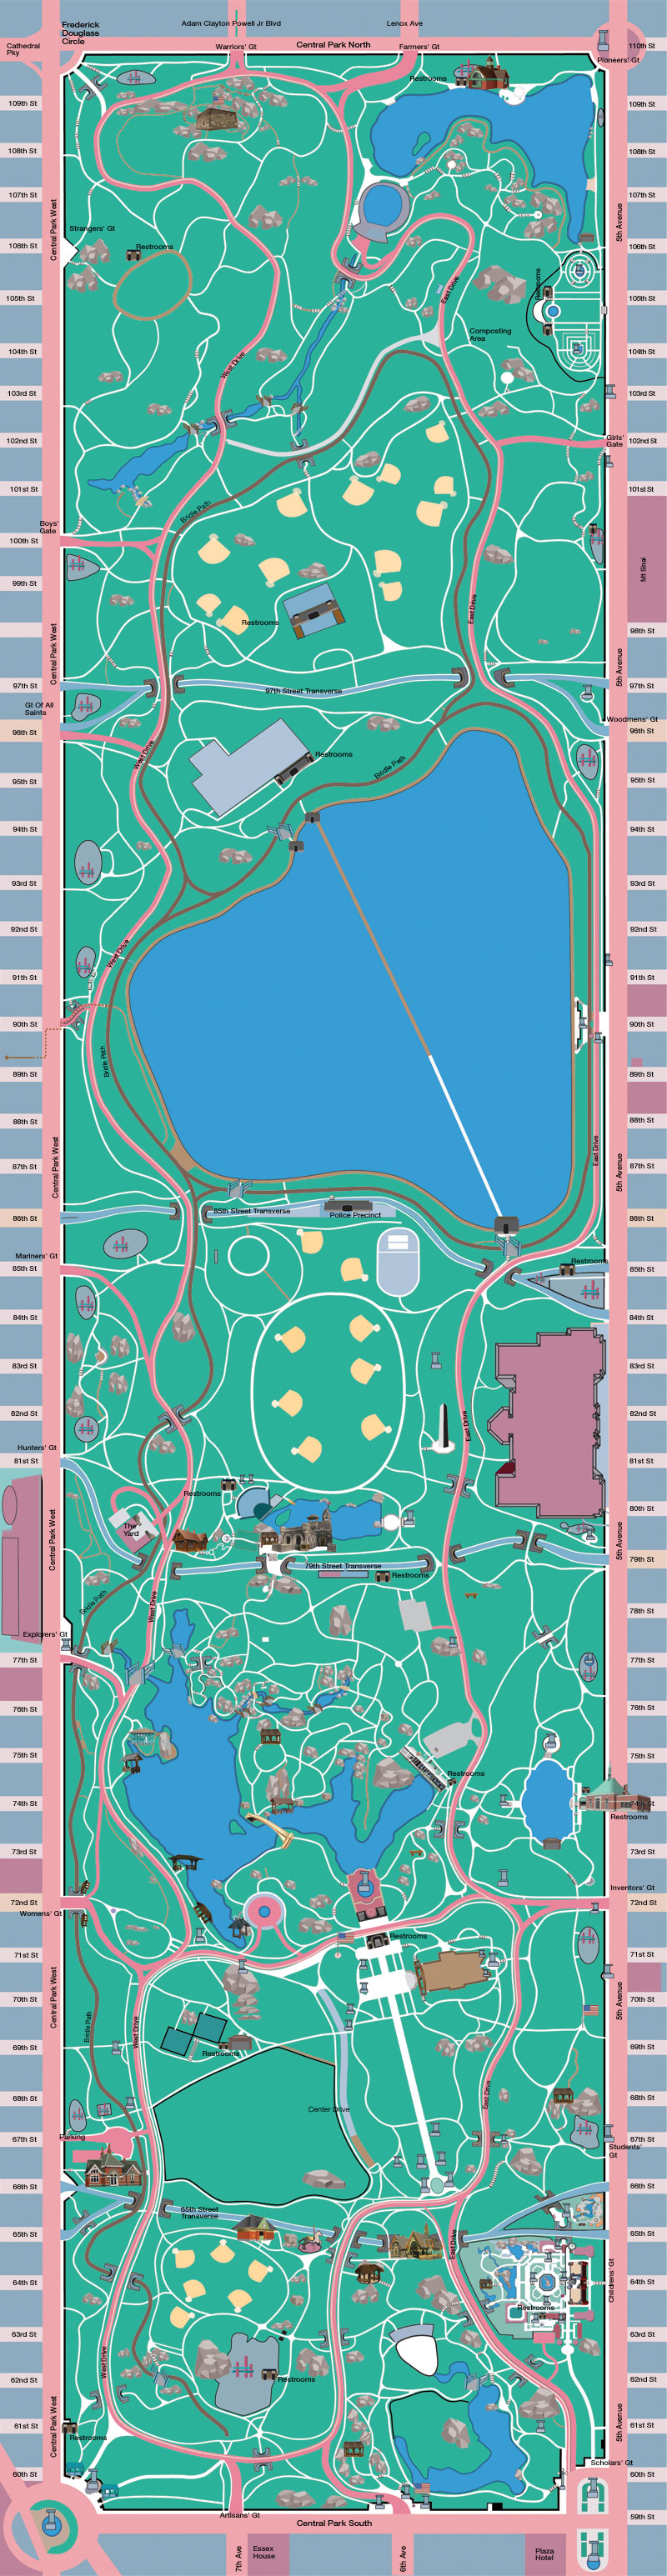 Central Park Interative Map